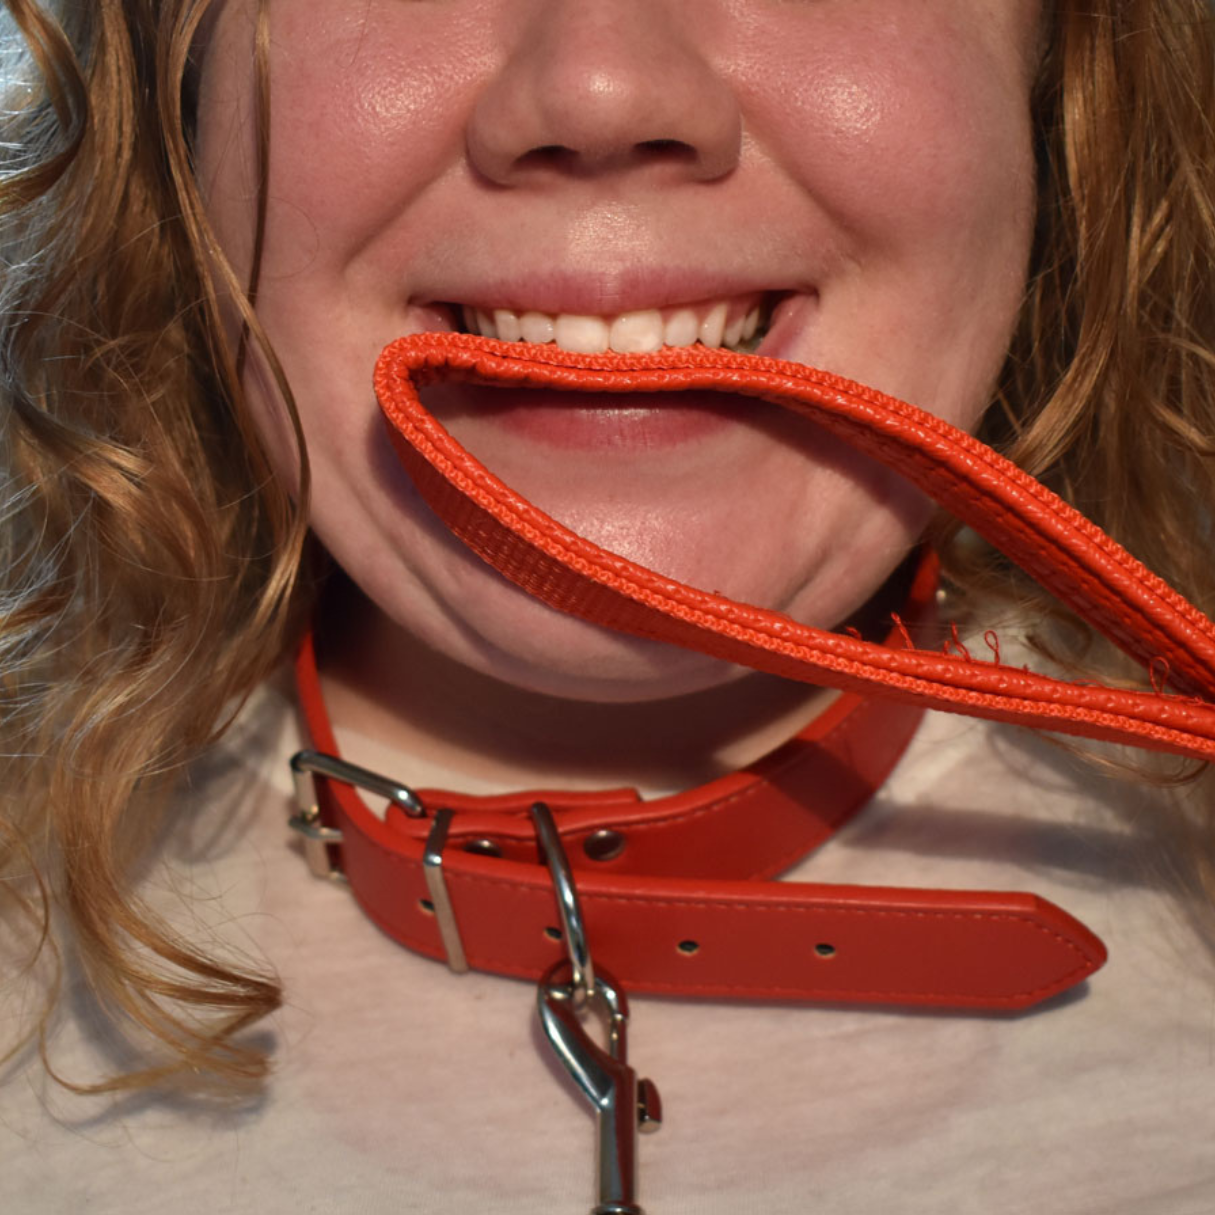 An extreme close up of pale, rosy cheeked person's nose, chin, and chest. They are wearing a loose red leather dog collar around their neck, holding the end of the leash between their teeth, and grinning.